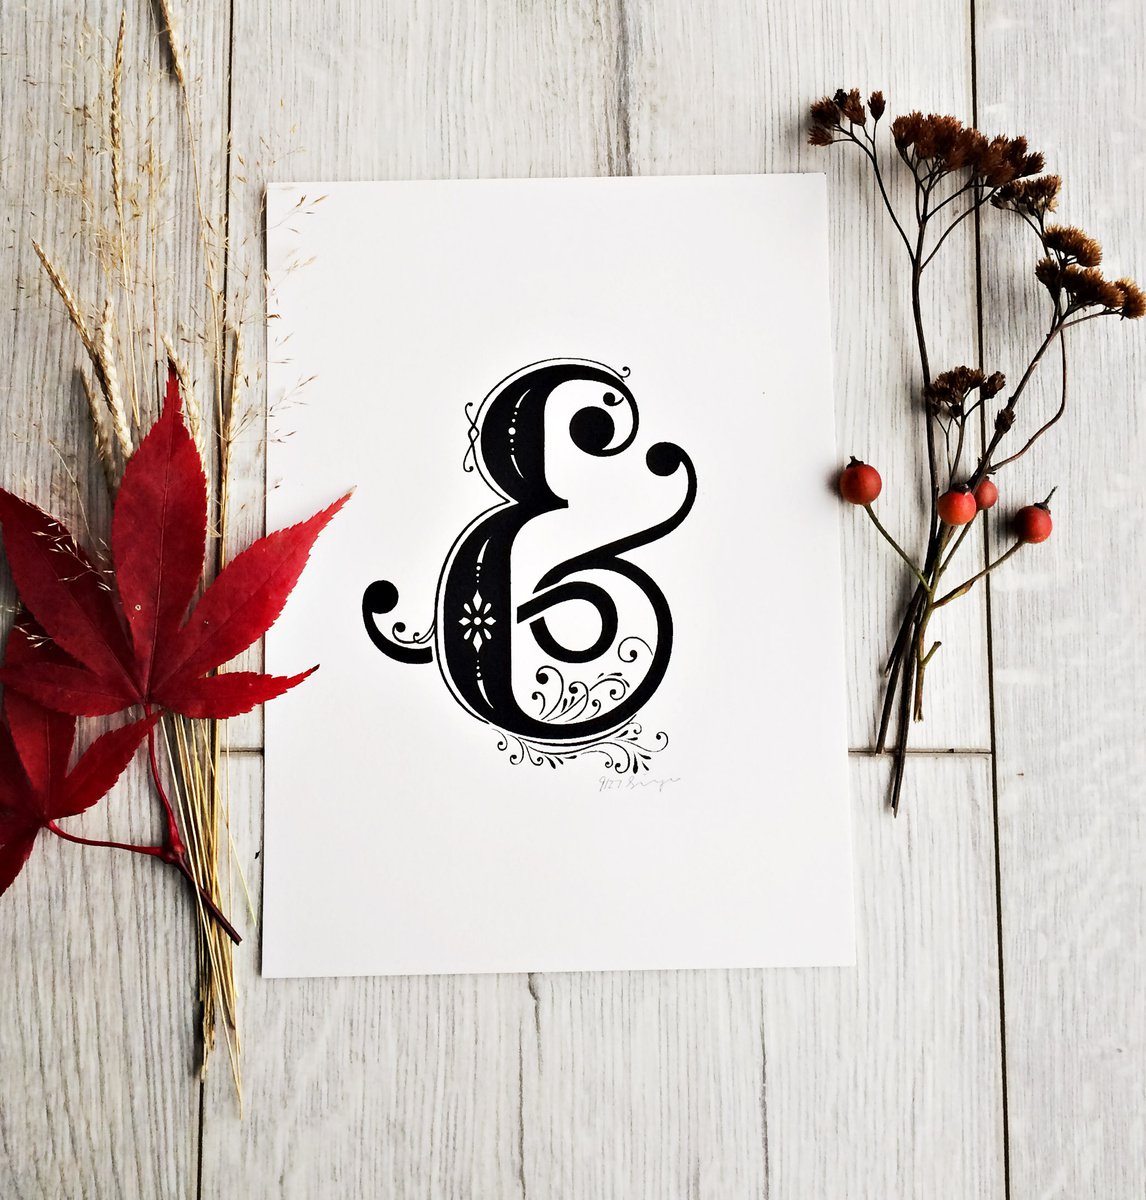 Ampersand Wall Art, A5 Screen Printed Black And White Typography Print